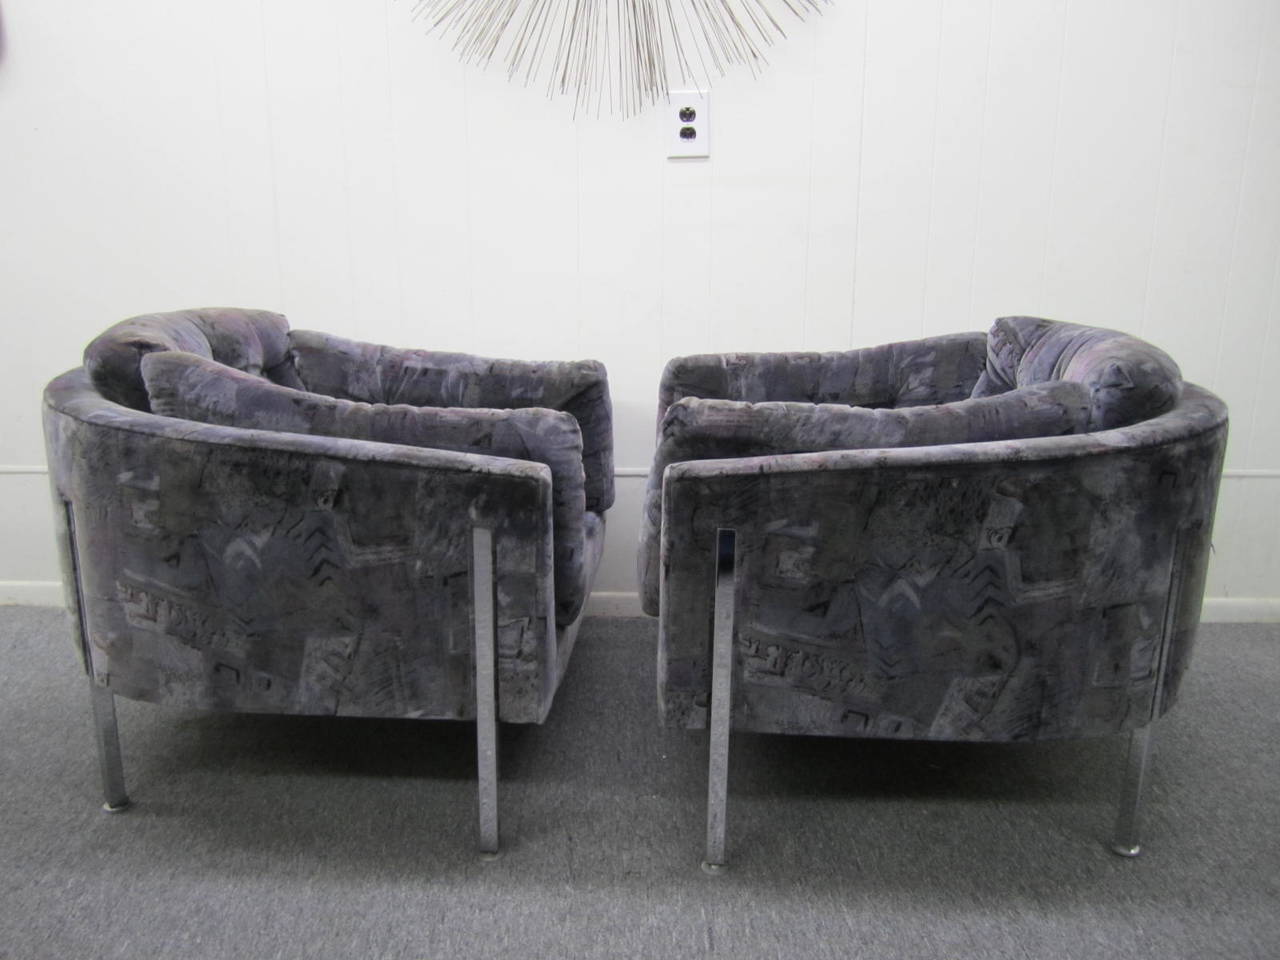 Exceedingly rare pair of oversized Milo Baughman chrome lounge chairs.  These fine chairs were reupholstered in the 80's with a lovely greyish purple patterned velvet in great vintage condition.  We love how the chrome legs are actually recessed